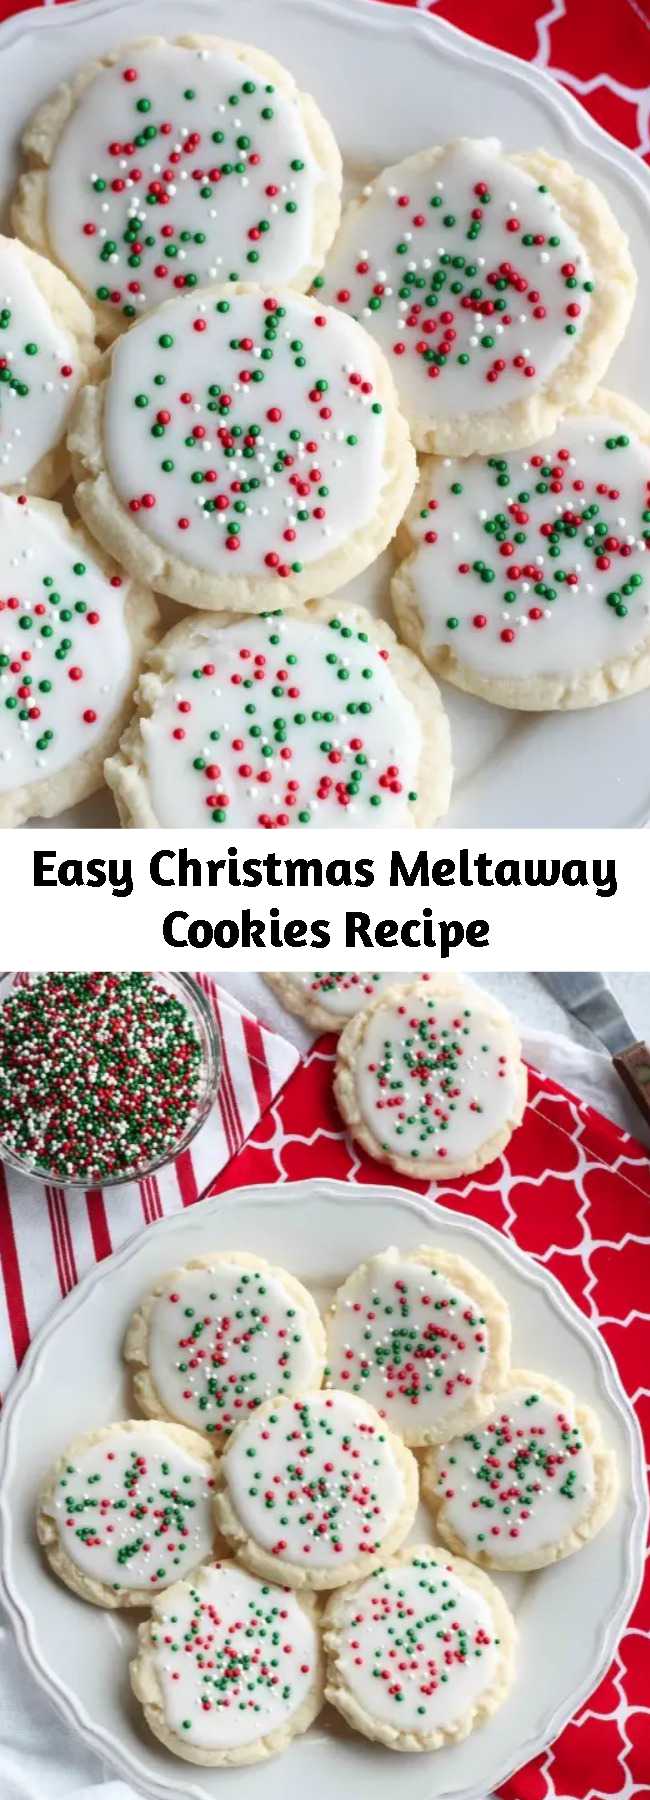 Easy Christmas Meltaway Cookies Recipe - Meltaway cookies are a soft, lightly sweet shortbread cookie that literally melts away in your mouth. Top it with a thin glaze and red and green sprinkles for a festive Christmas cookie treat. #christmascookies #cookieexchange